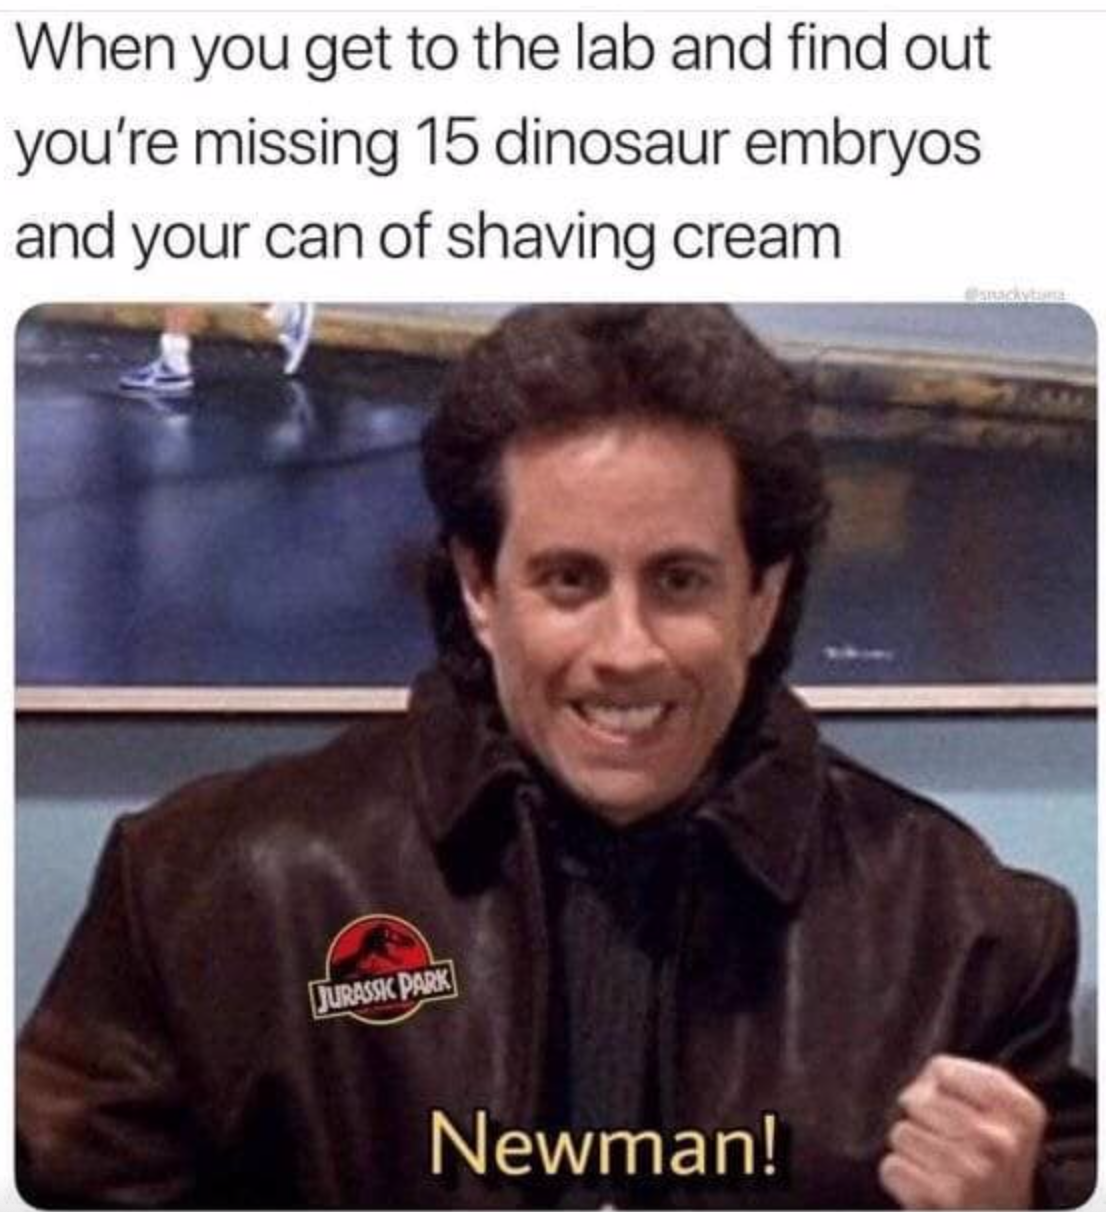 jerry seinfeld newman - When you get to the lab and find out you're missing 15 dinosaur embryos and your can of shaving cream Jurassic Park Newman!